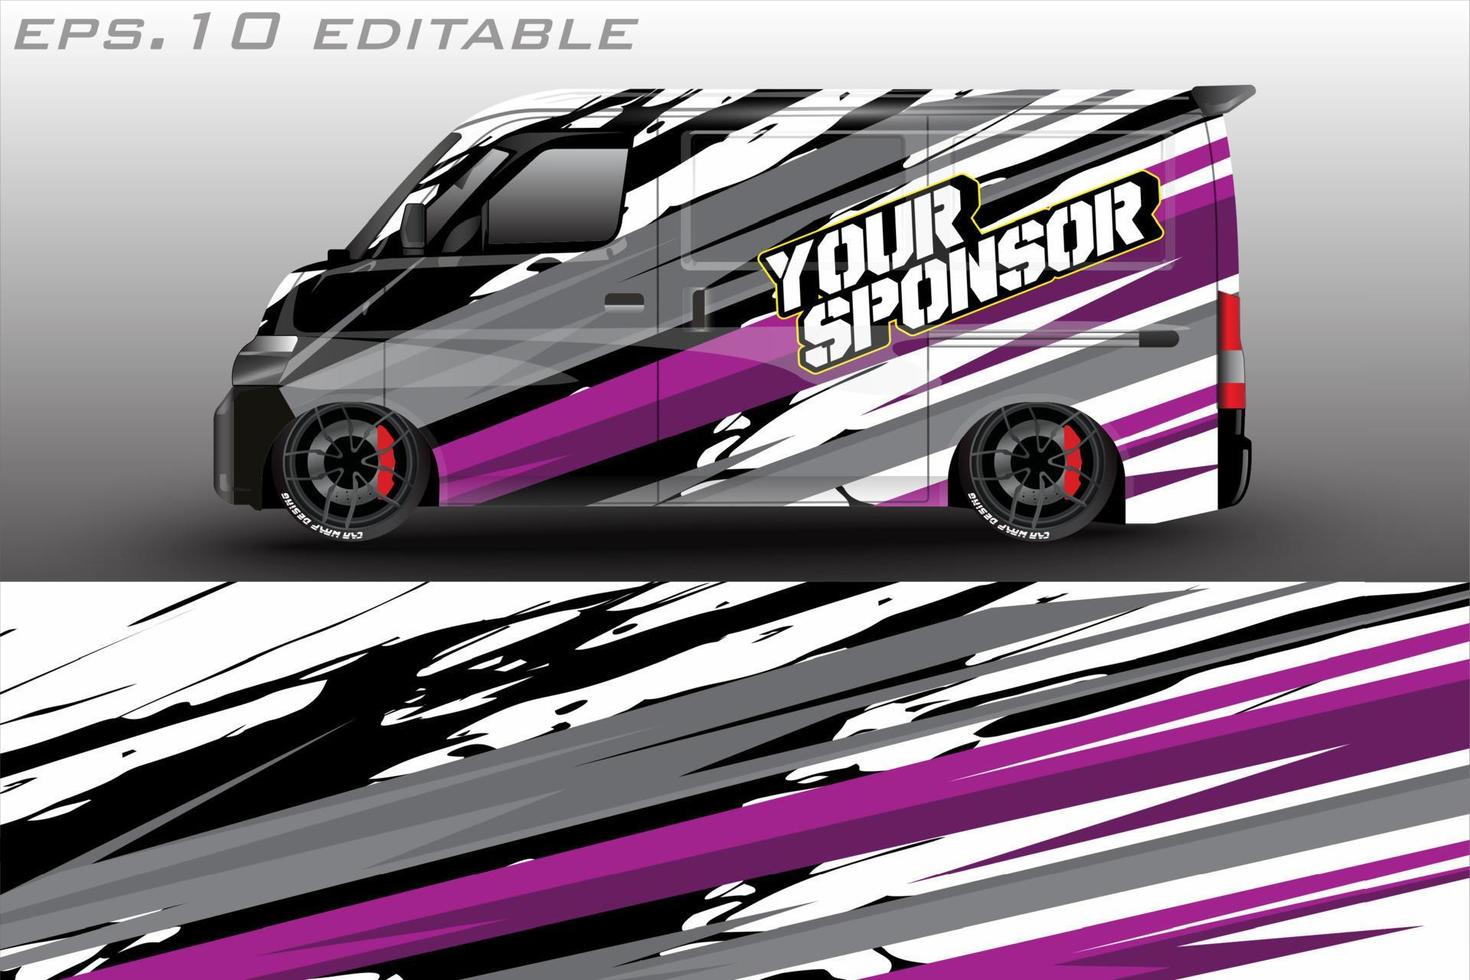 Car graphic vector design. abstract racing shape with modern camouflage design for vehicle vinyl wrap